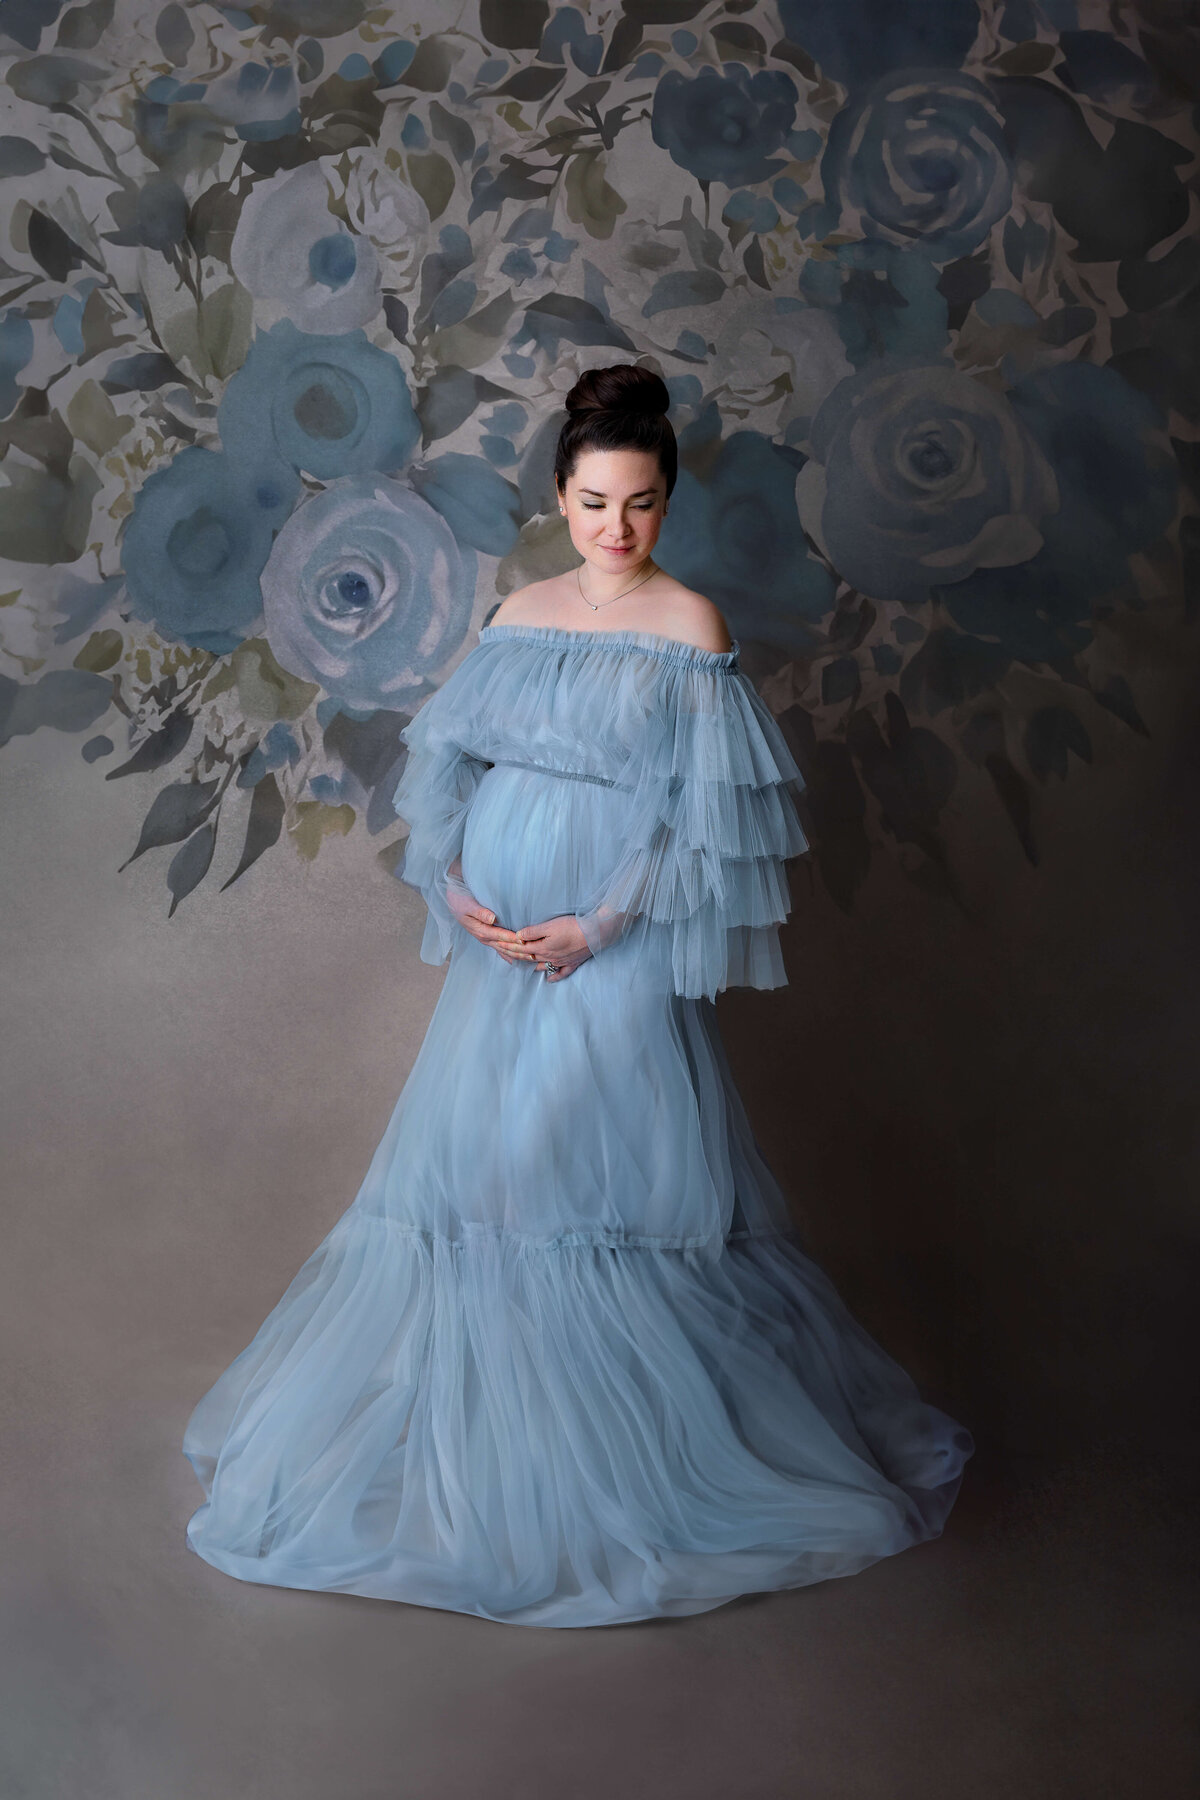 expecting mother wearing a blue maternity gown on a floral backdrop at her maternity sessioni